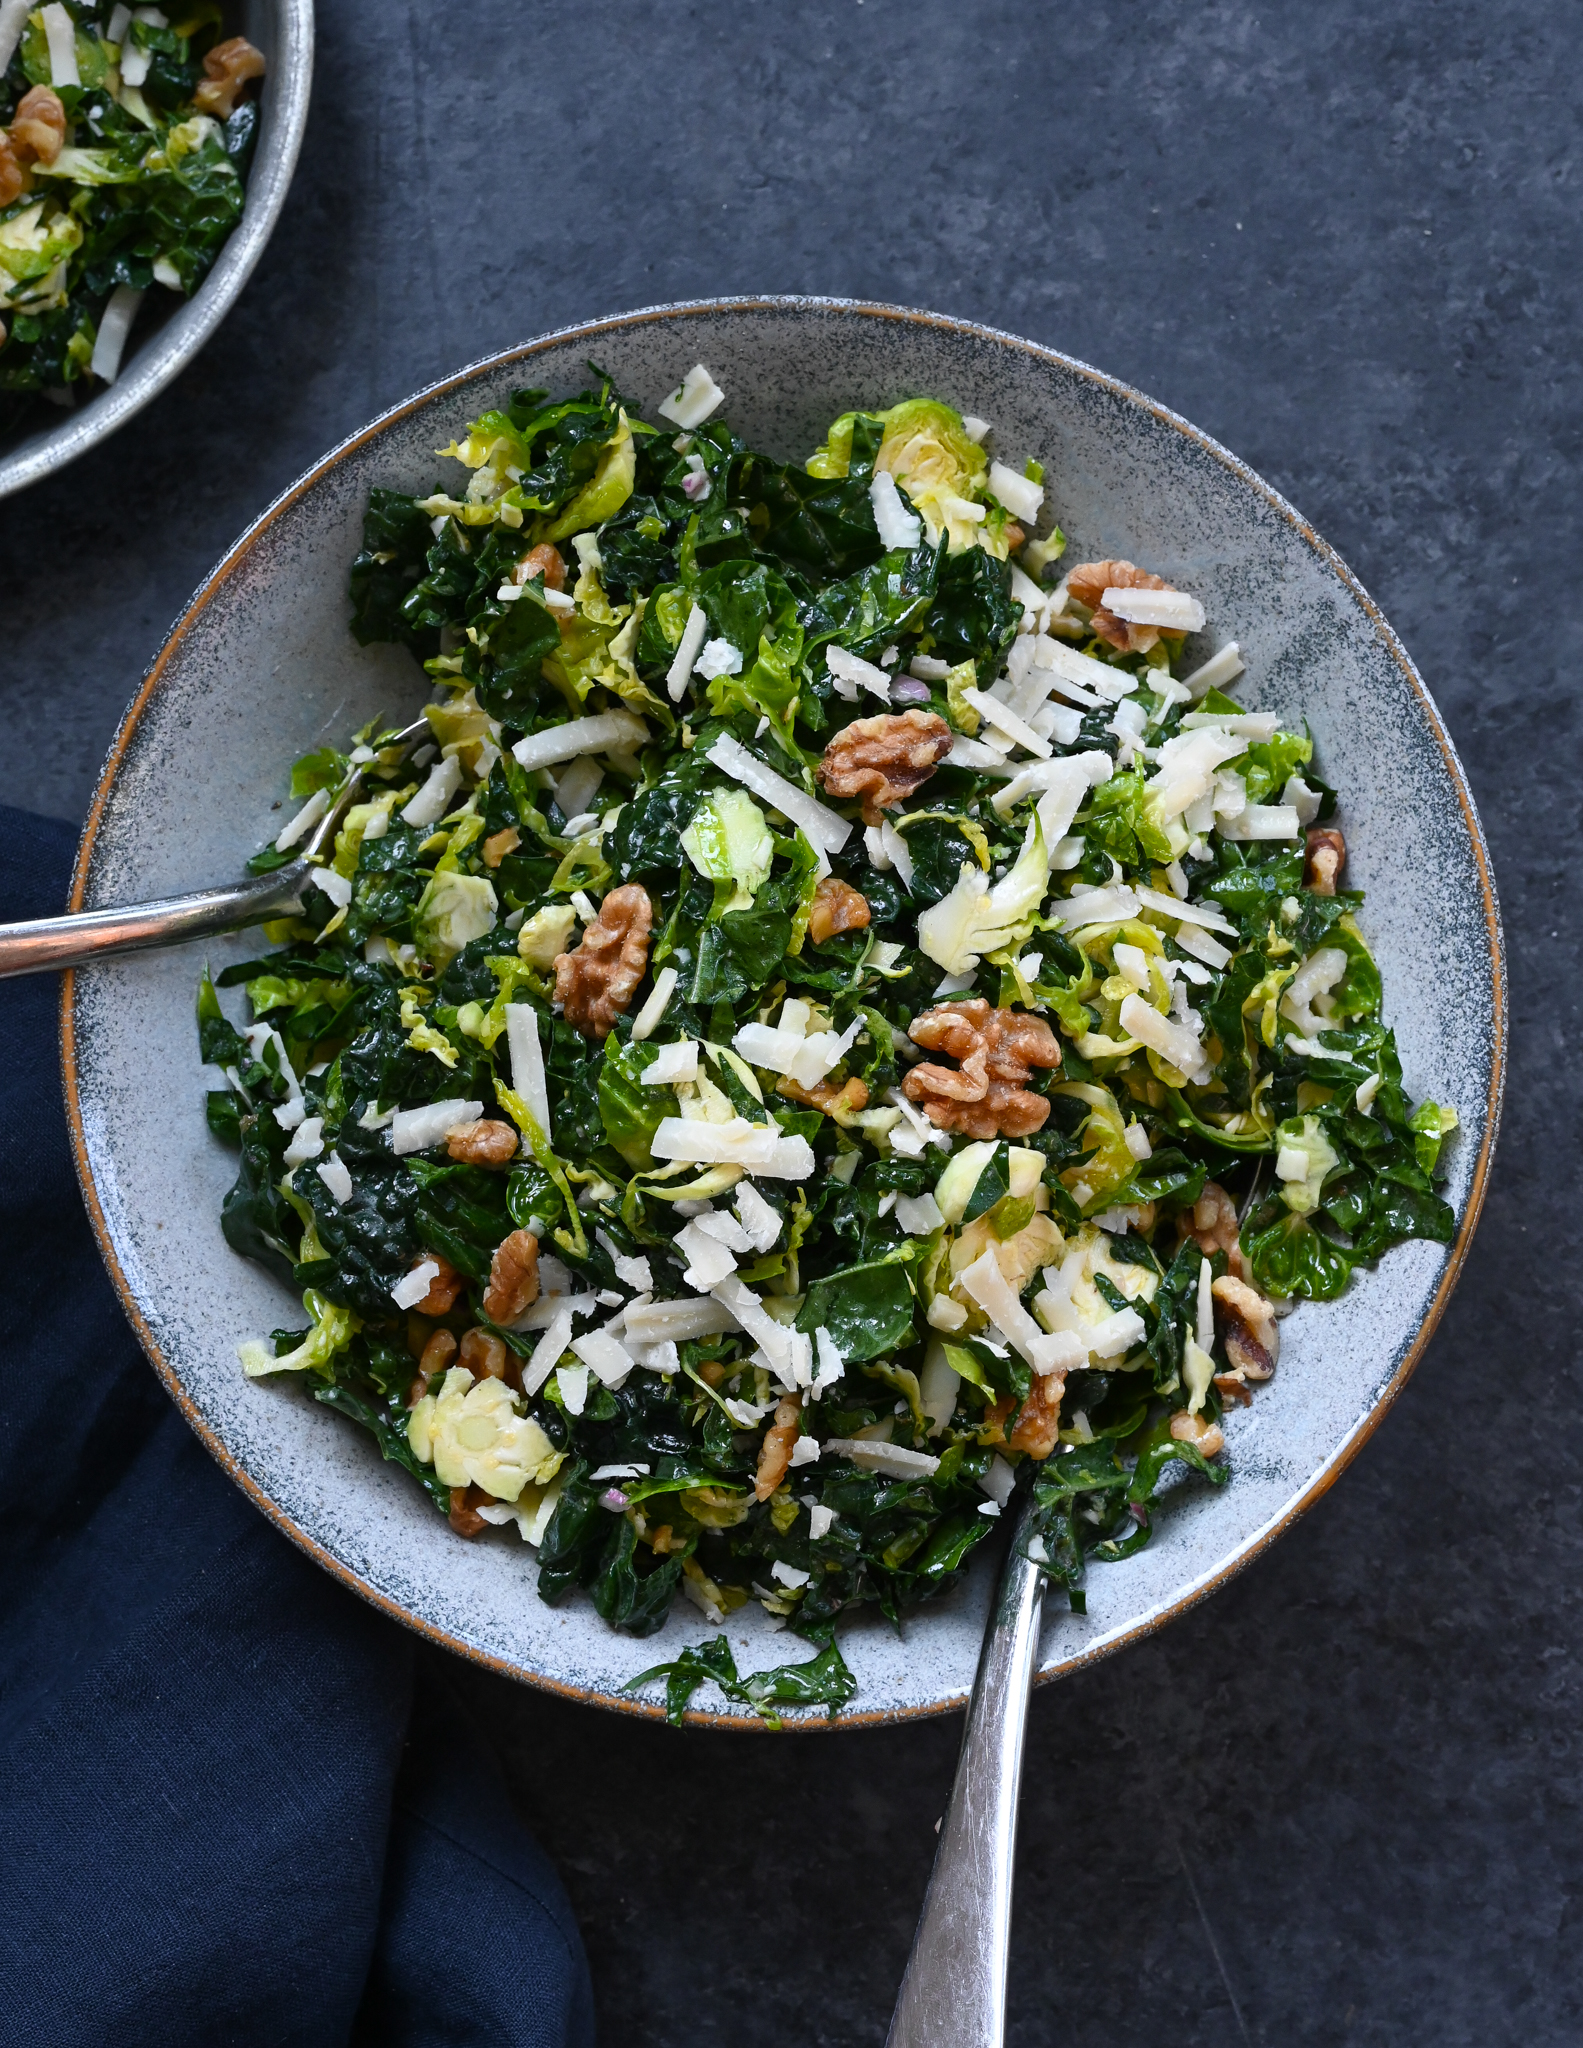 https://www.onceuponachef.com/images/2015/03/kale-and-brussels-sprouts-salad-1-1.jpg